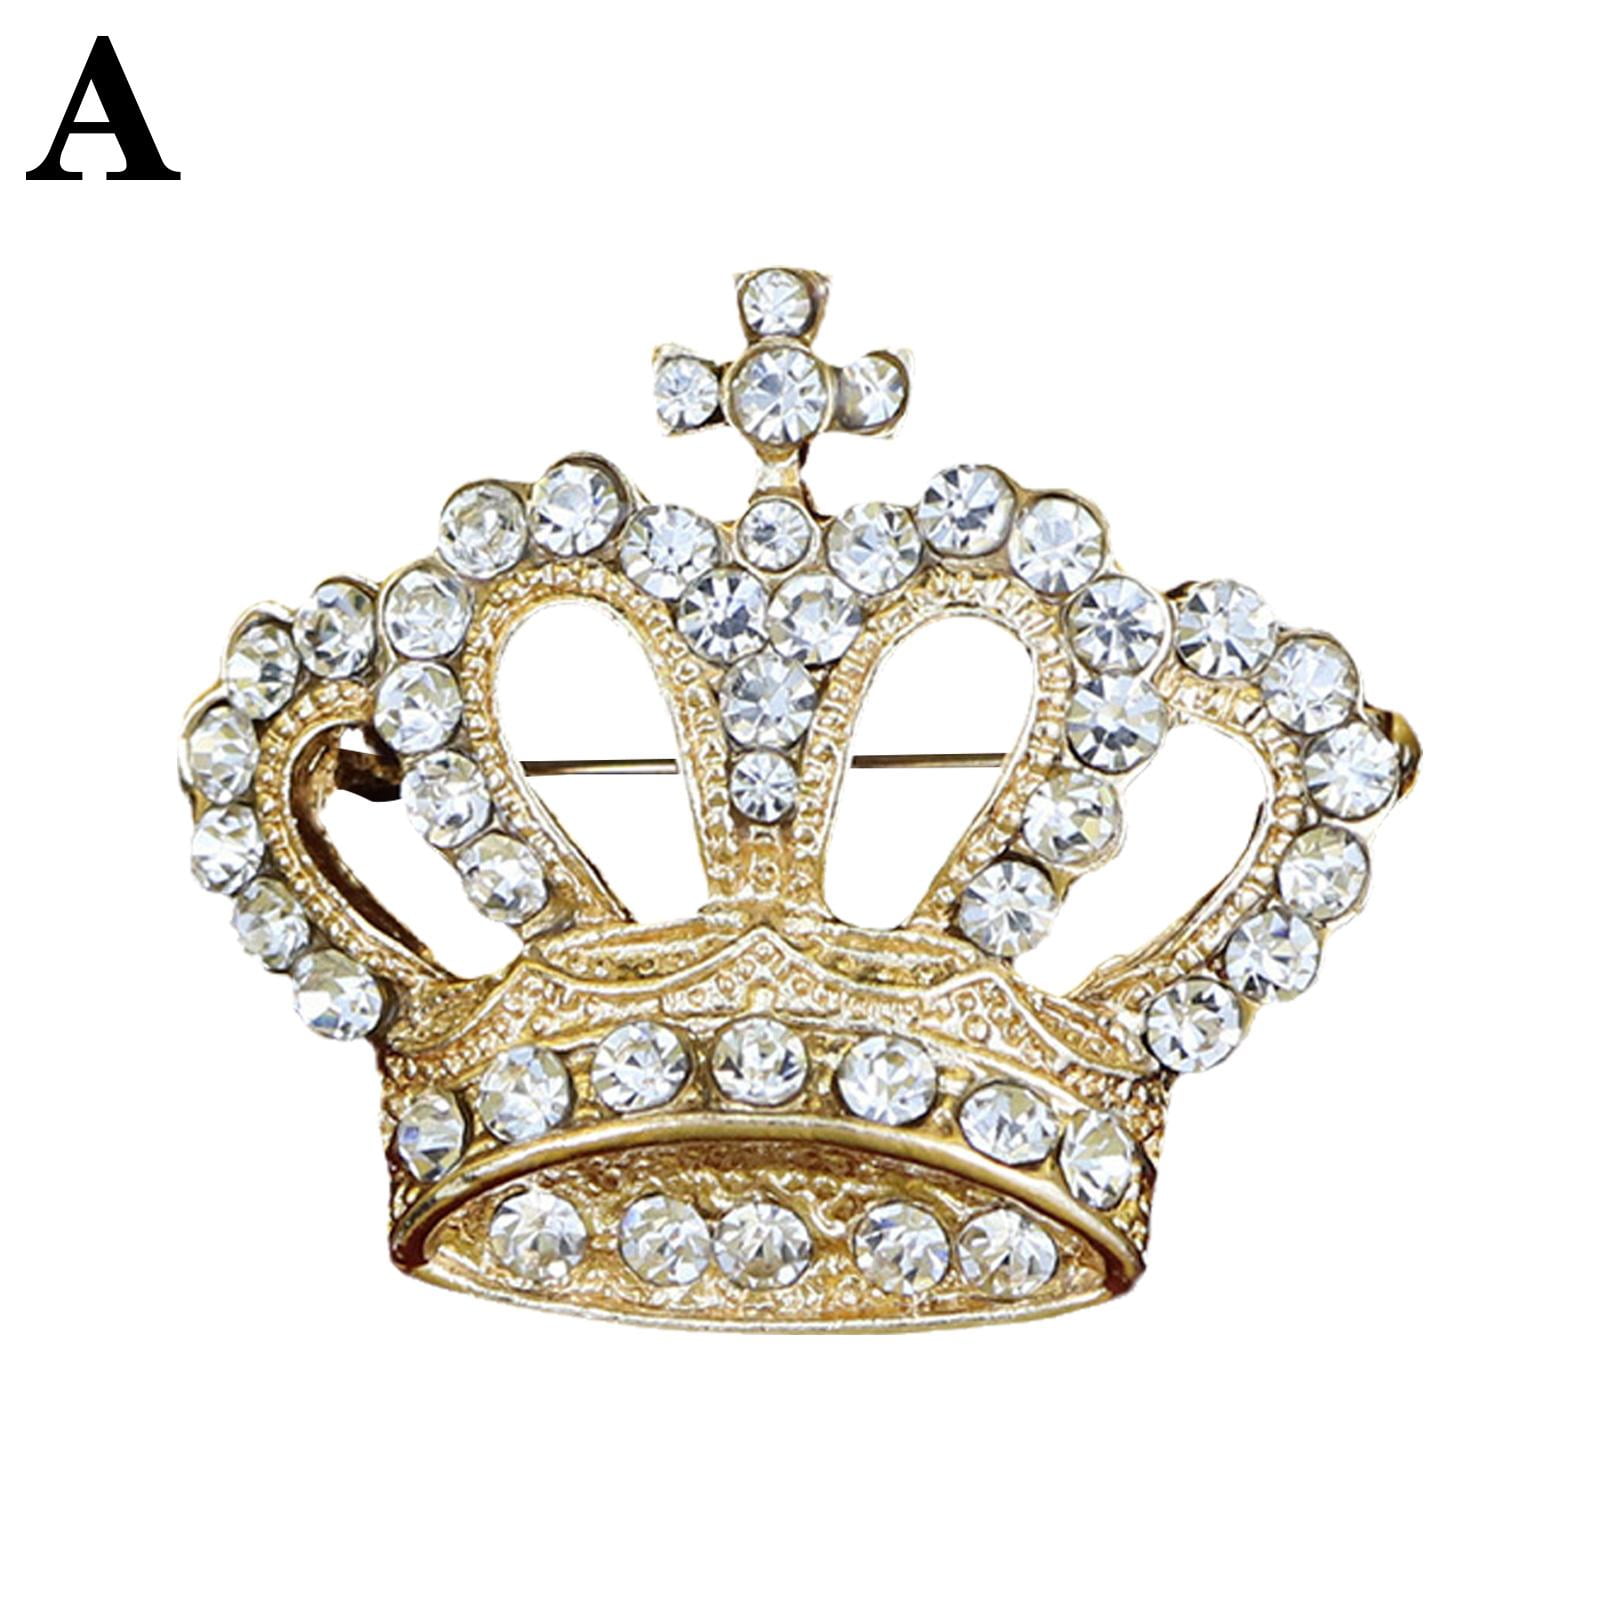 Exquisite Crown Brooches Pins Beautiful High Quality Crystal Brooch Pins  For Women Fashion Jewelry Christmas Brooches From Goodlinessjew, $1.11